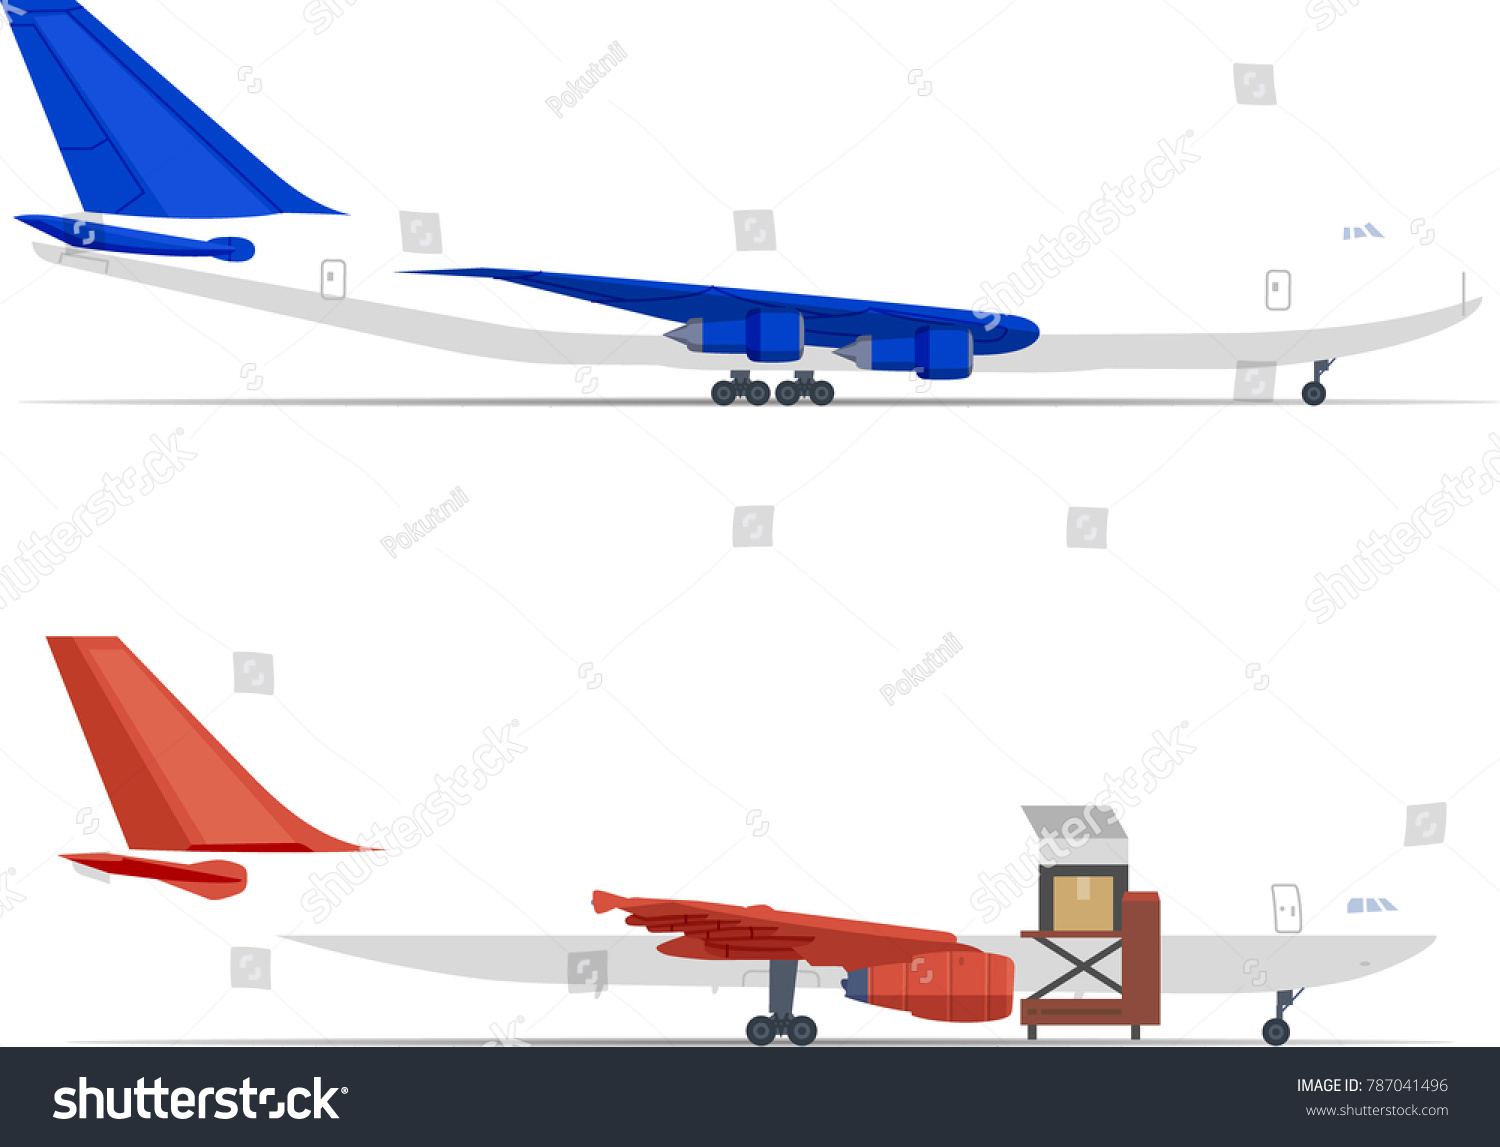 SVG of Airplane Boeing 747 - 100-200 cargo  loading in the airport svg